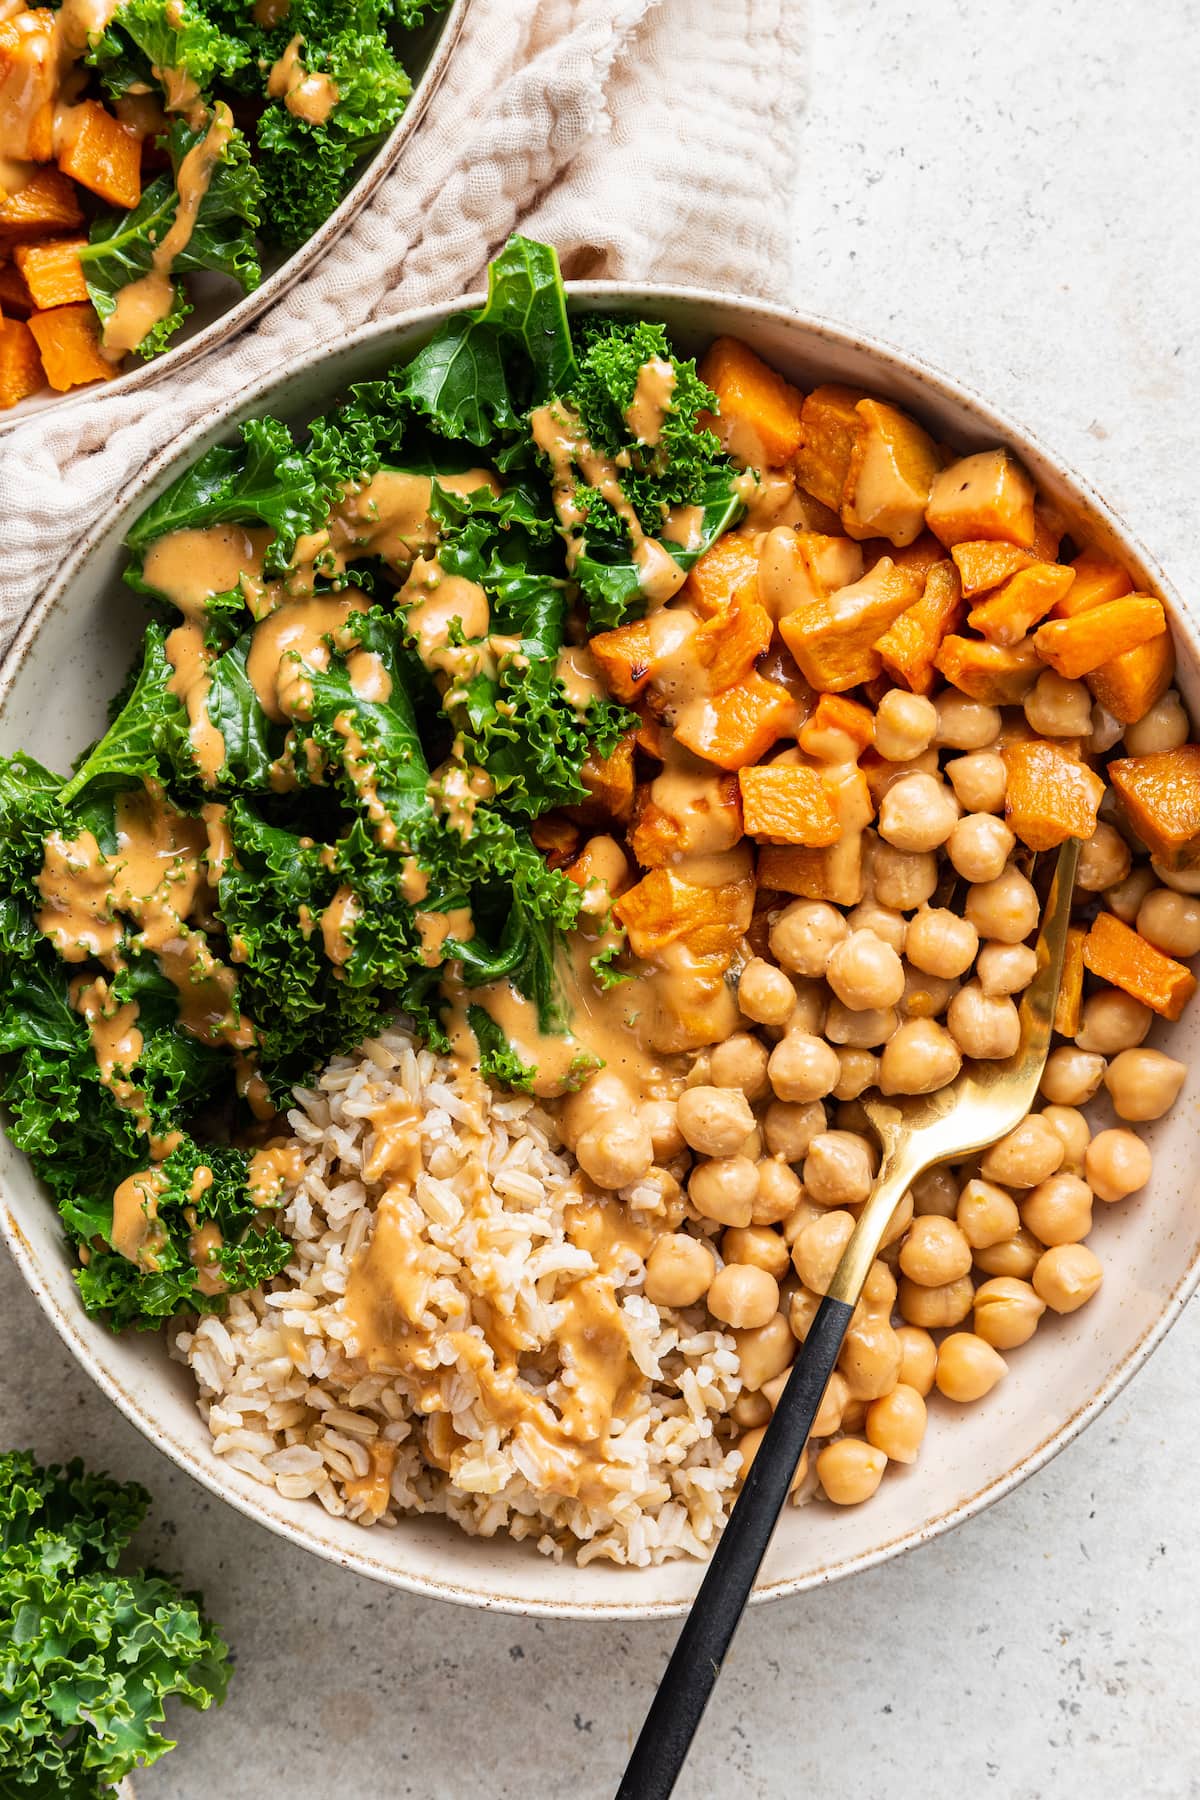 A white bowl containing kale, sweet potato, chickpeas, brown rice, and a creamy peanut sauce.